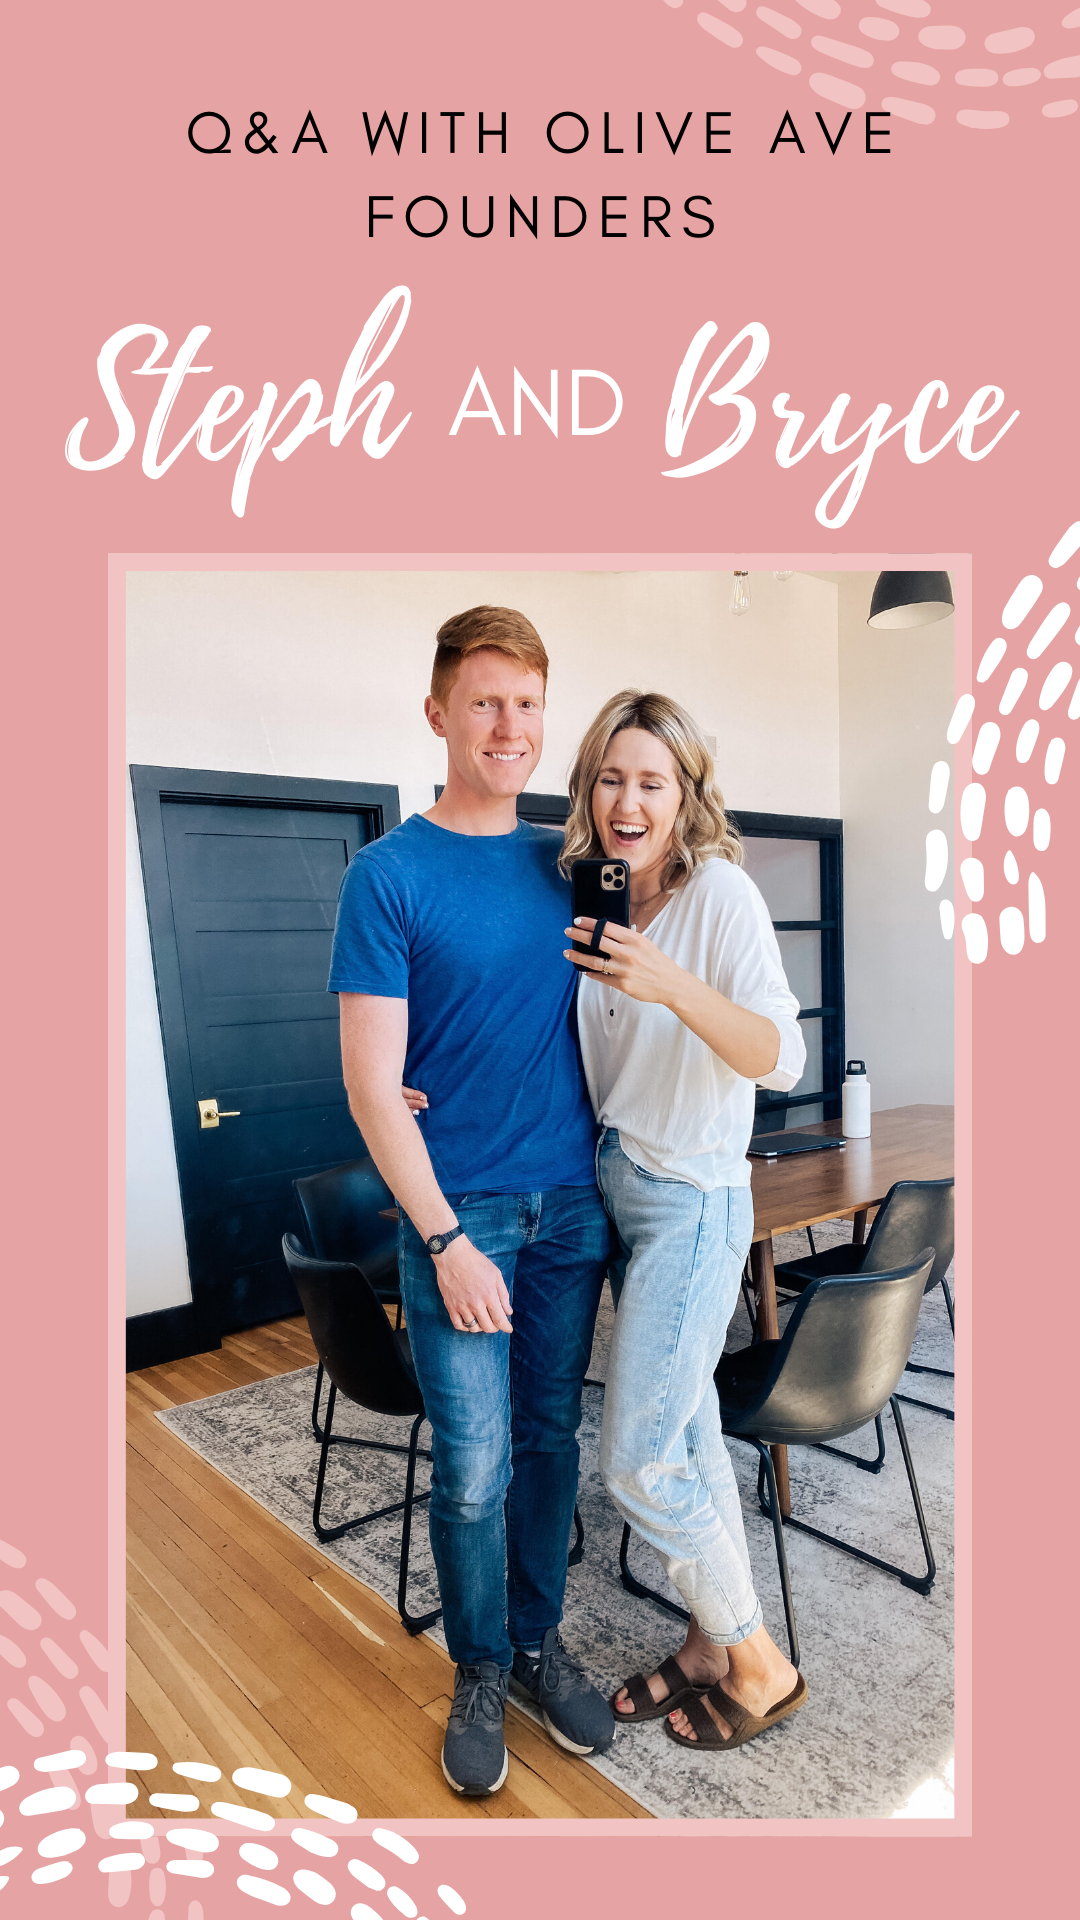 Q&A with Olive Ave Founders Steph and Bryce